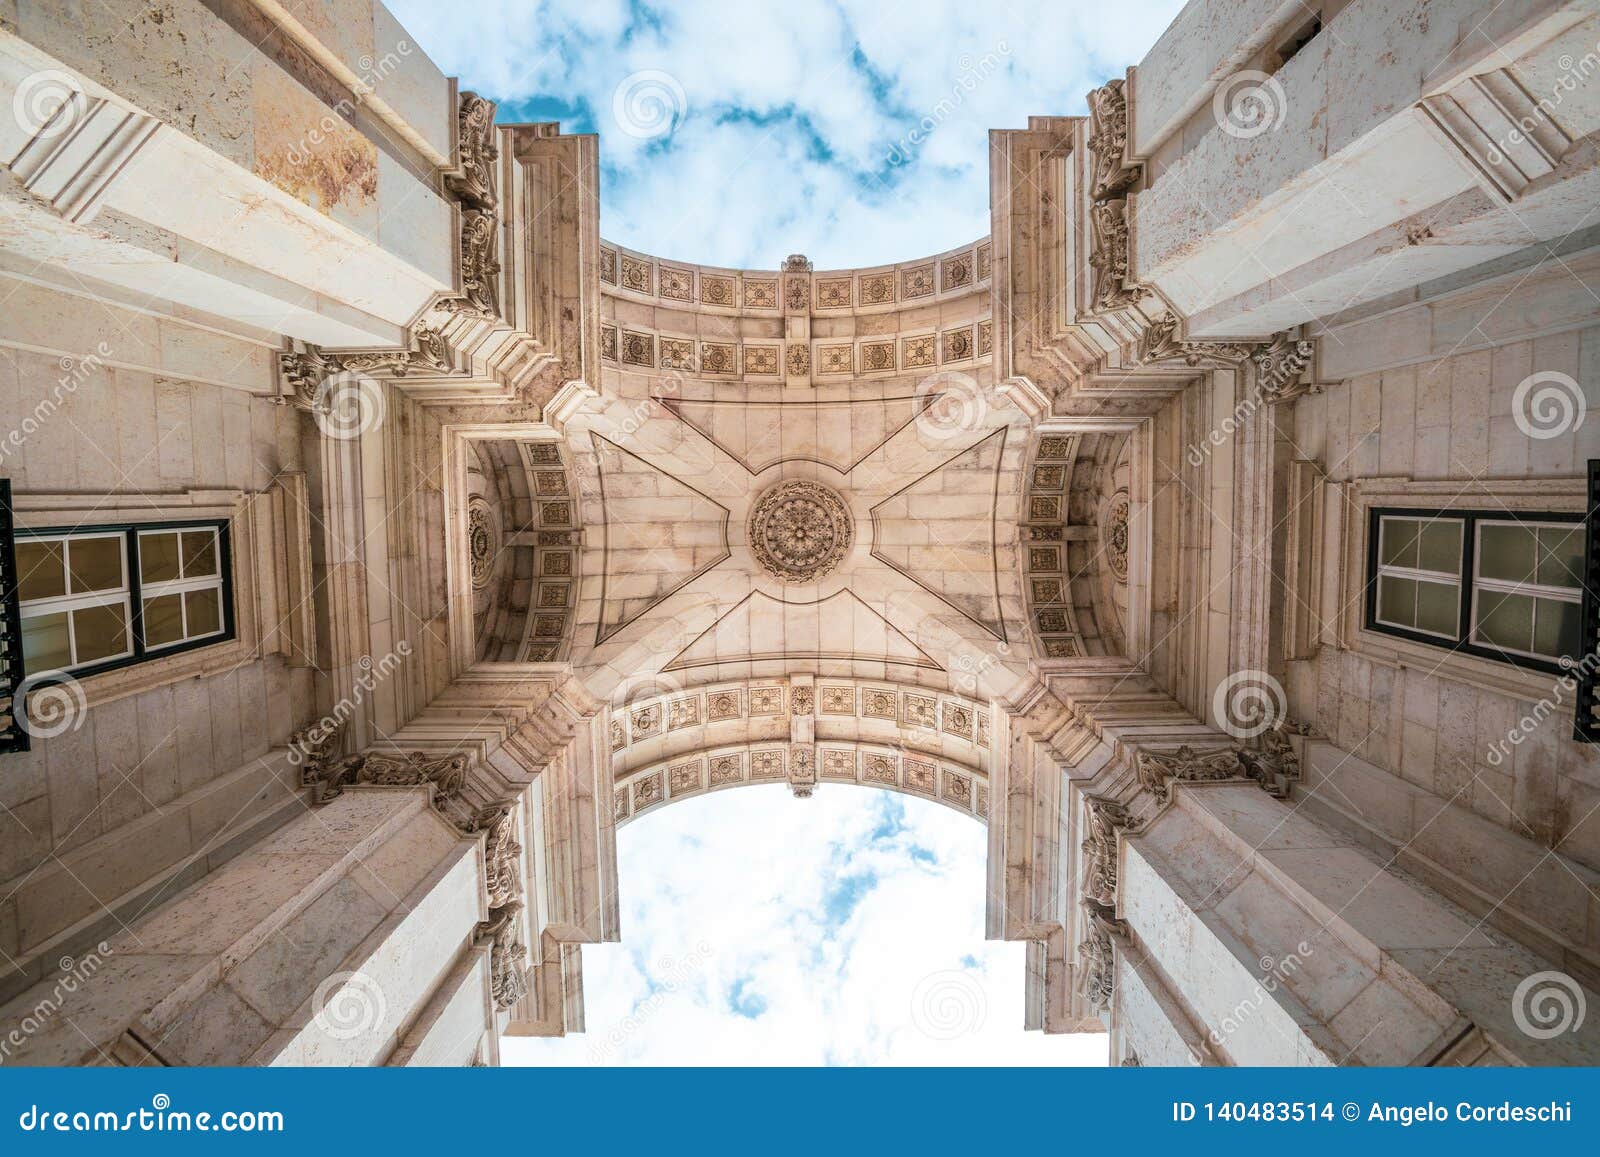 rua augusta triumphal arch in the historic center of the city of lisbon in portugal.